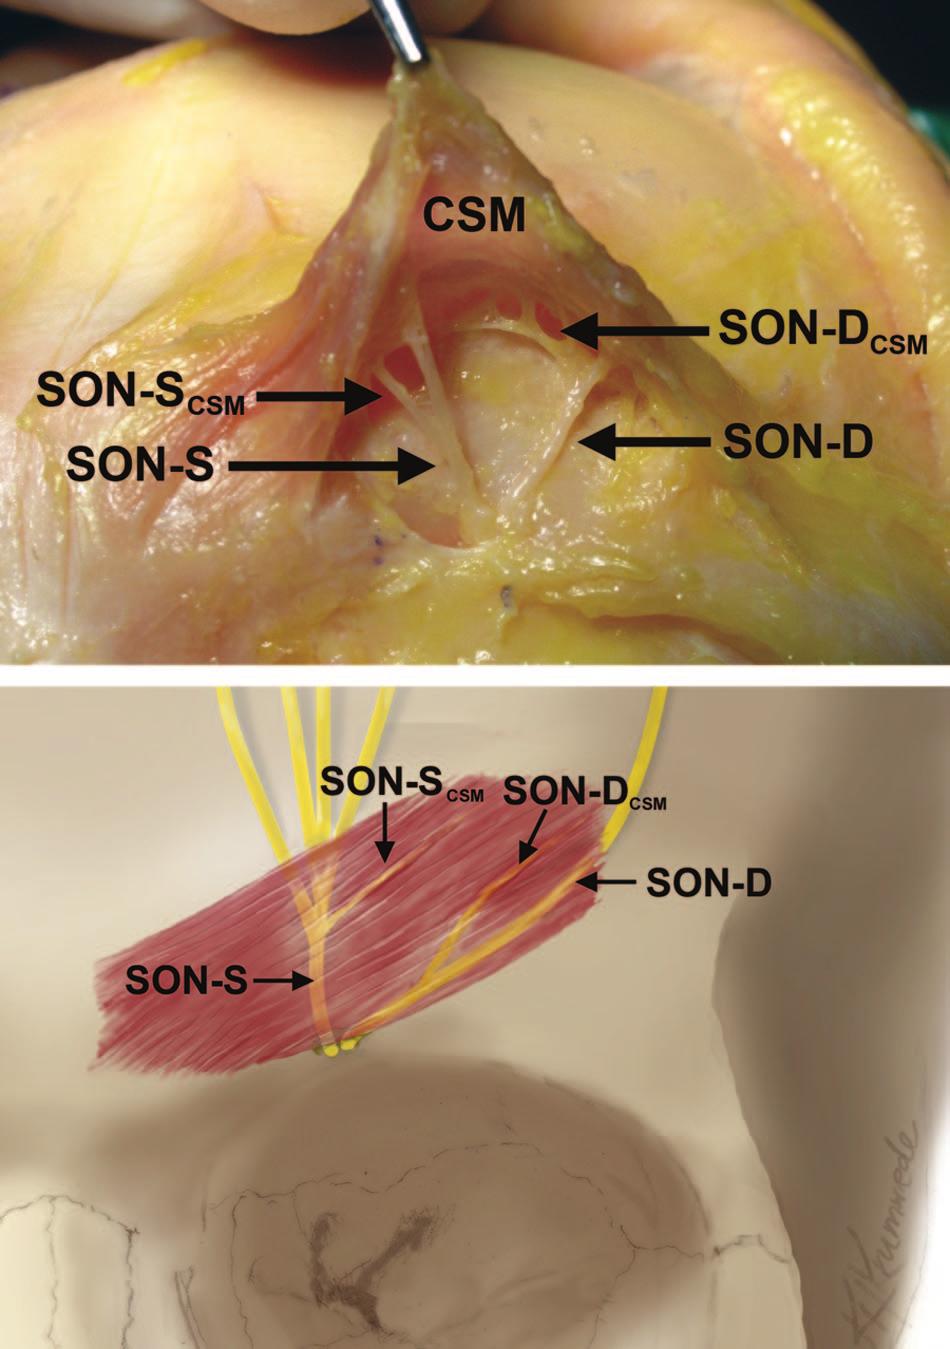 (Below) SON-D branching was simplified for illustration purposes.